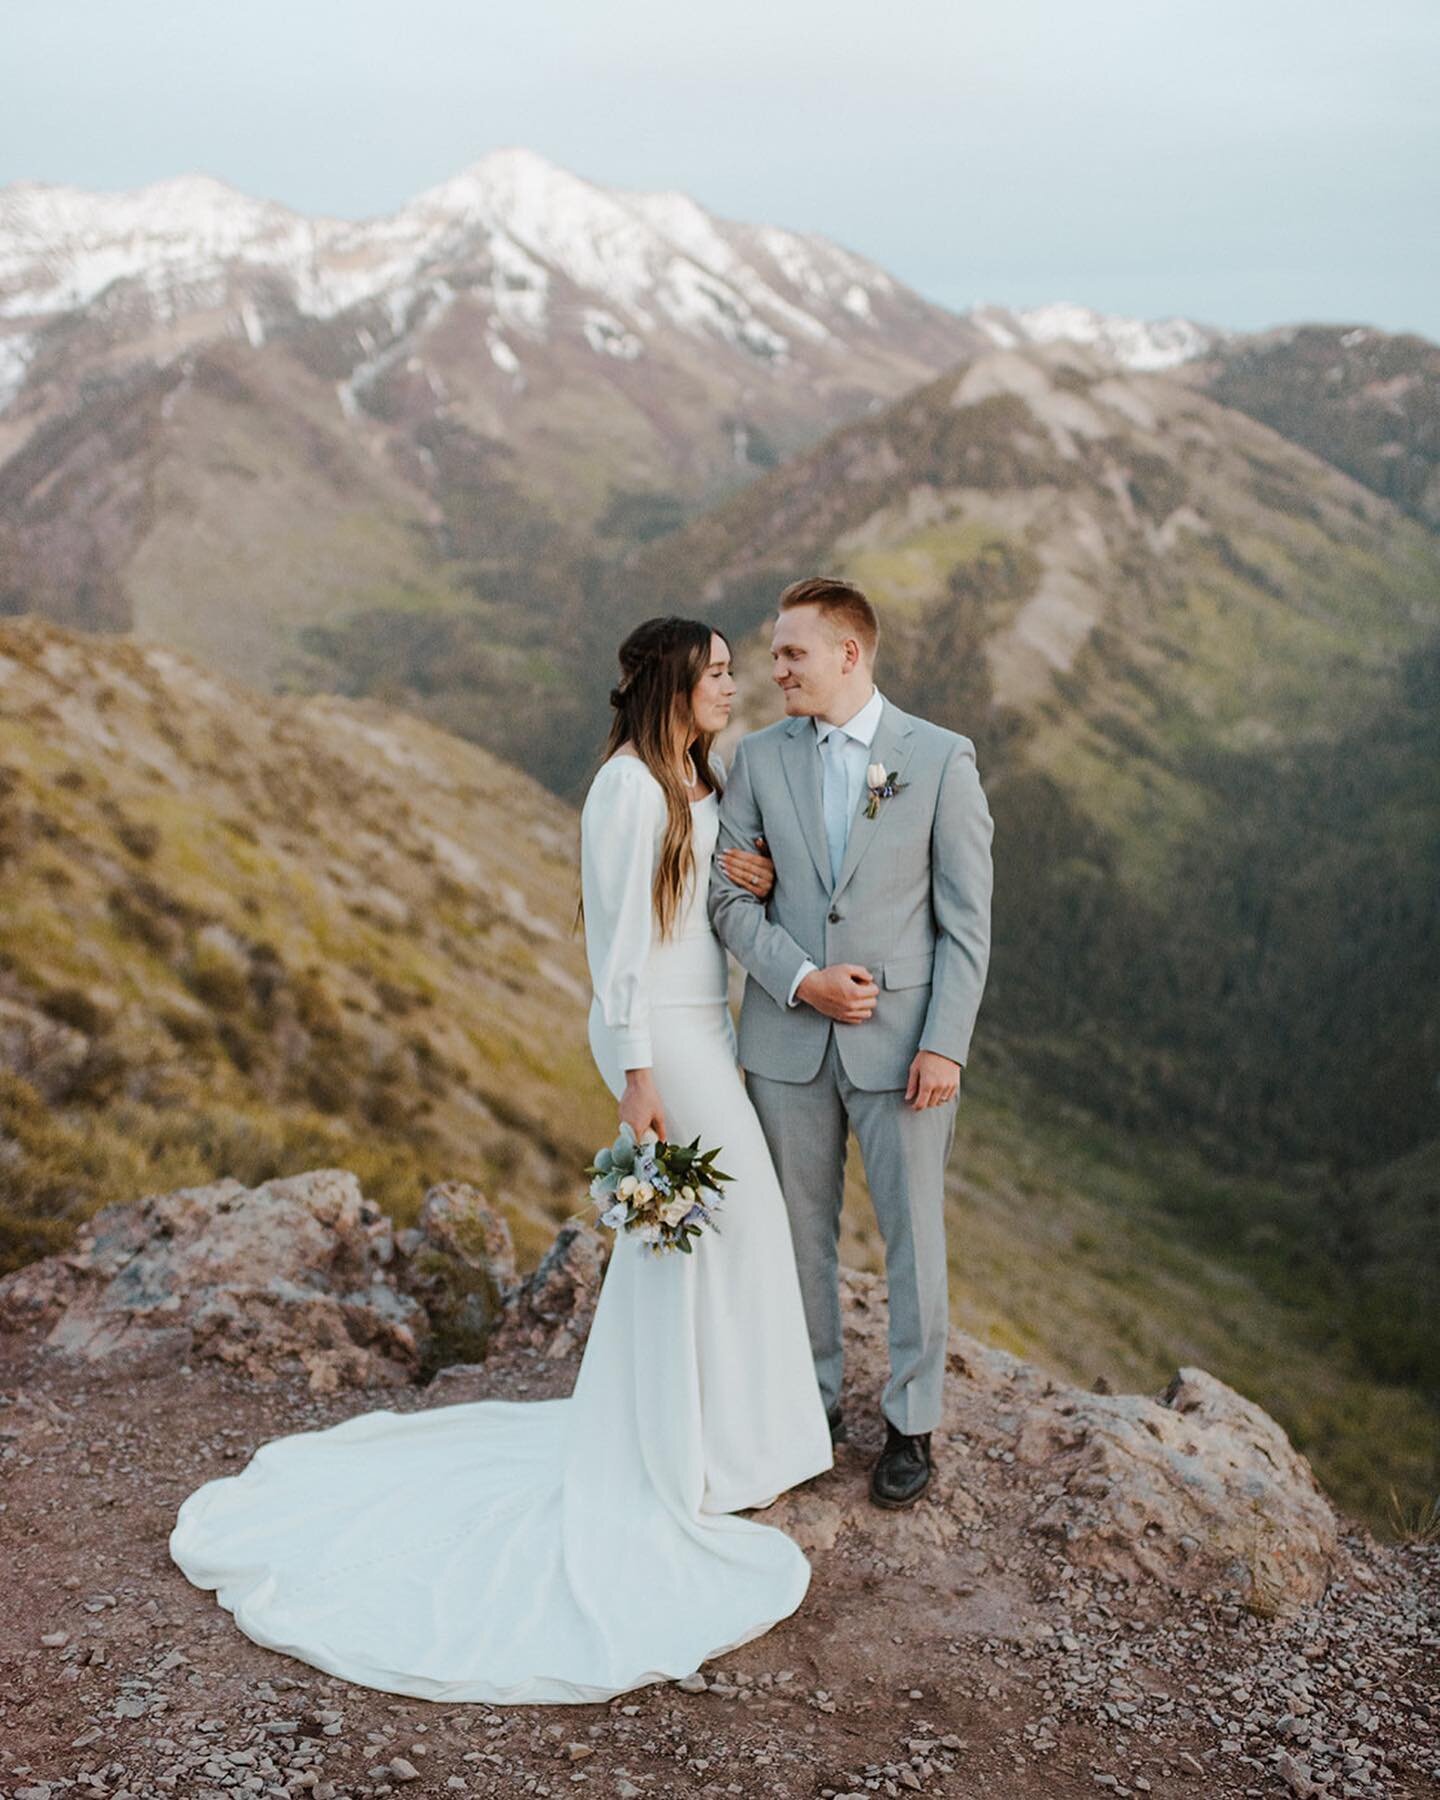 This nice weather is making me want to be back in the mountains with these two 😍 who wants to join me here again this summer?? 

#utahweddingphotographer #weddingphotographer #oregonweddingphotographer #utahwedding